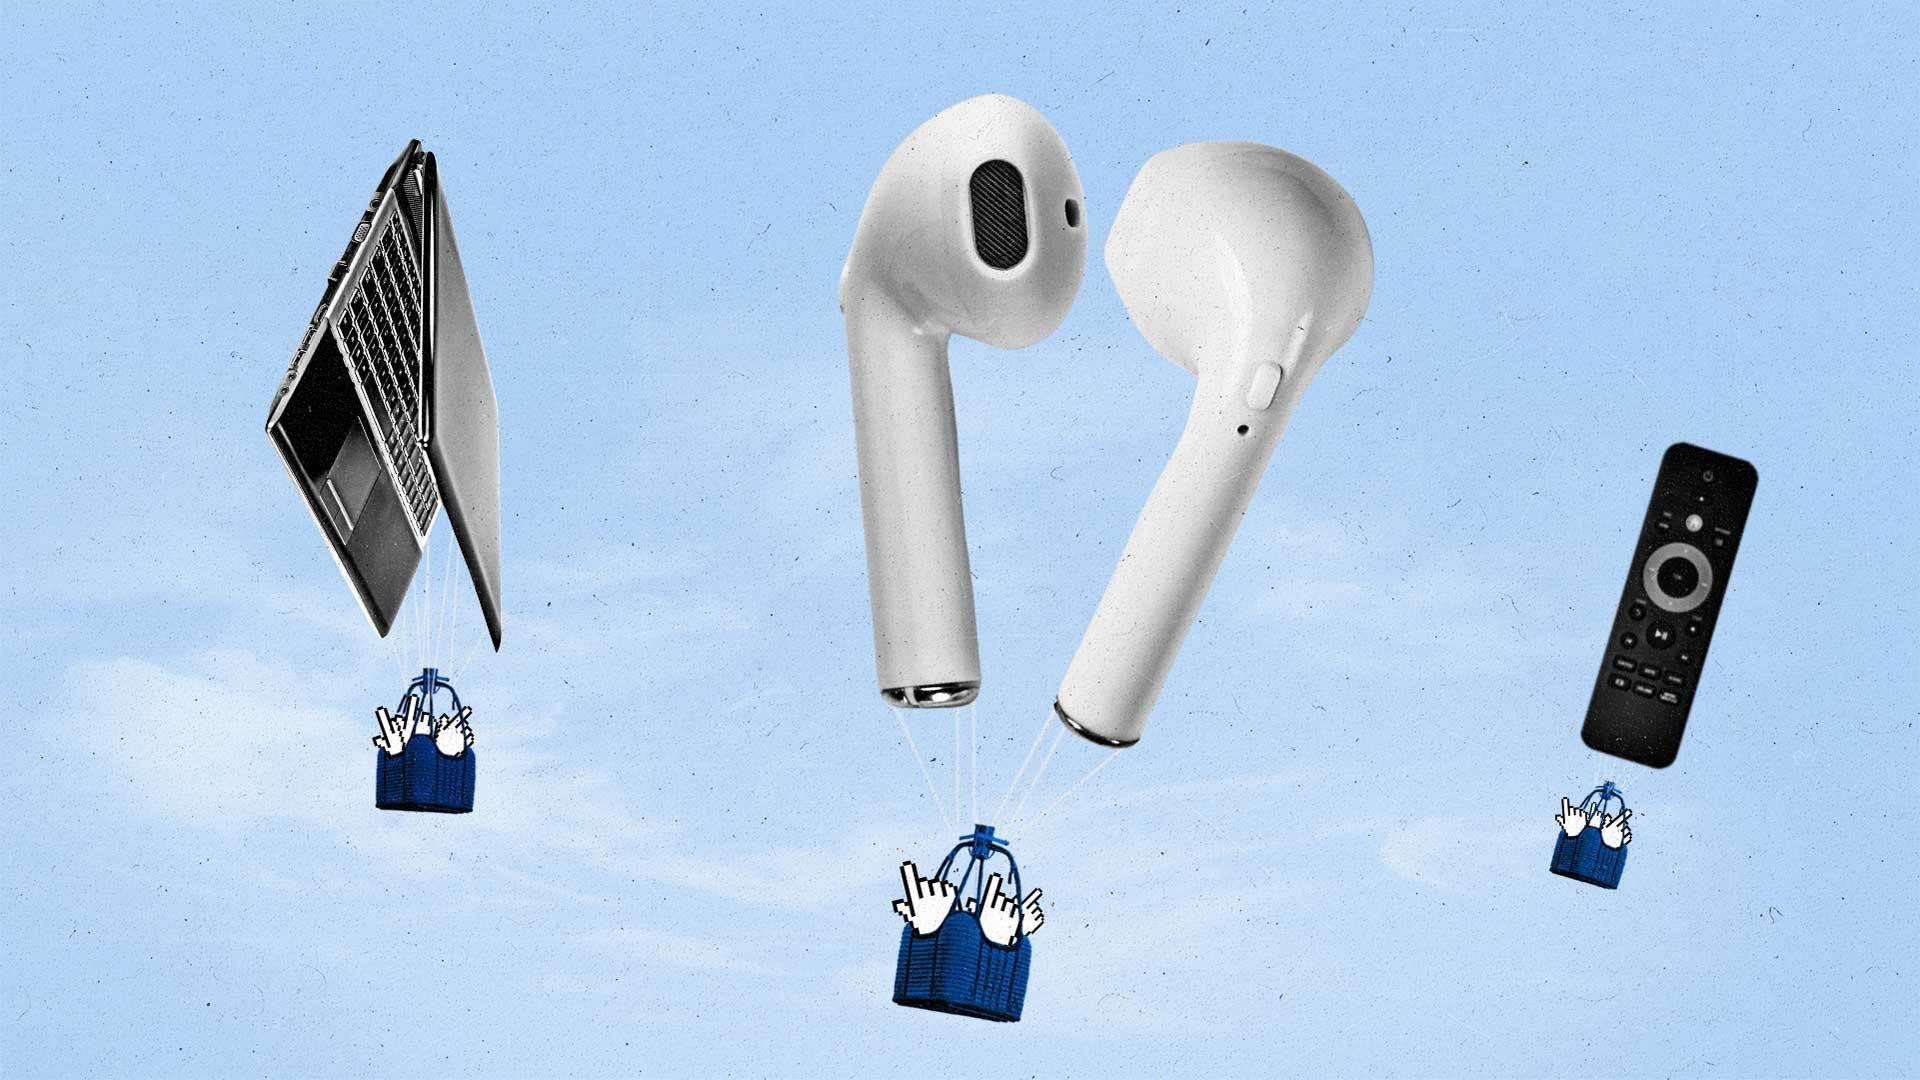 Earpods, a laptop and a streaming remote are sailing upwards into the air, hot air balloon-style, while carrying web cursors as passengers.